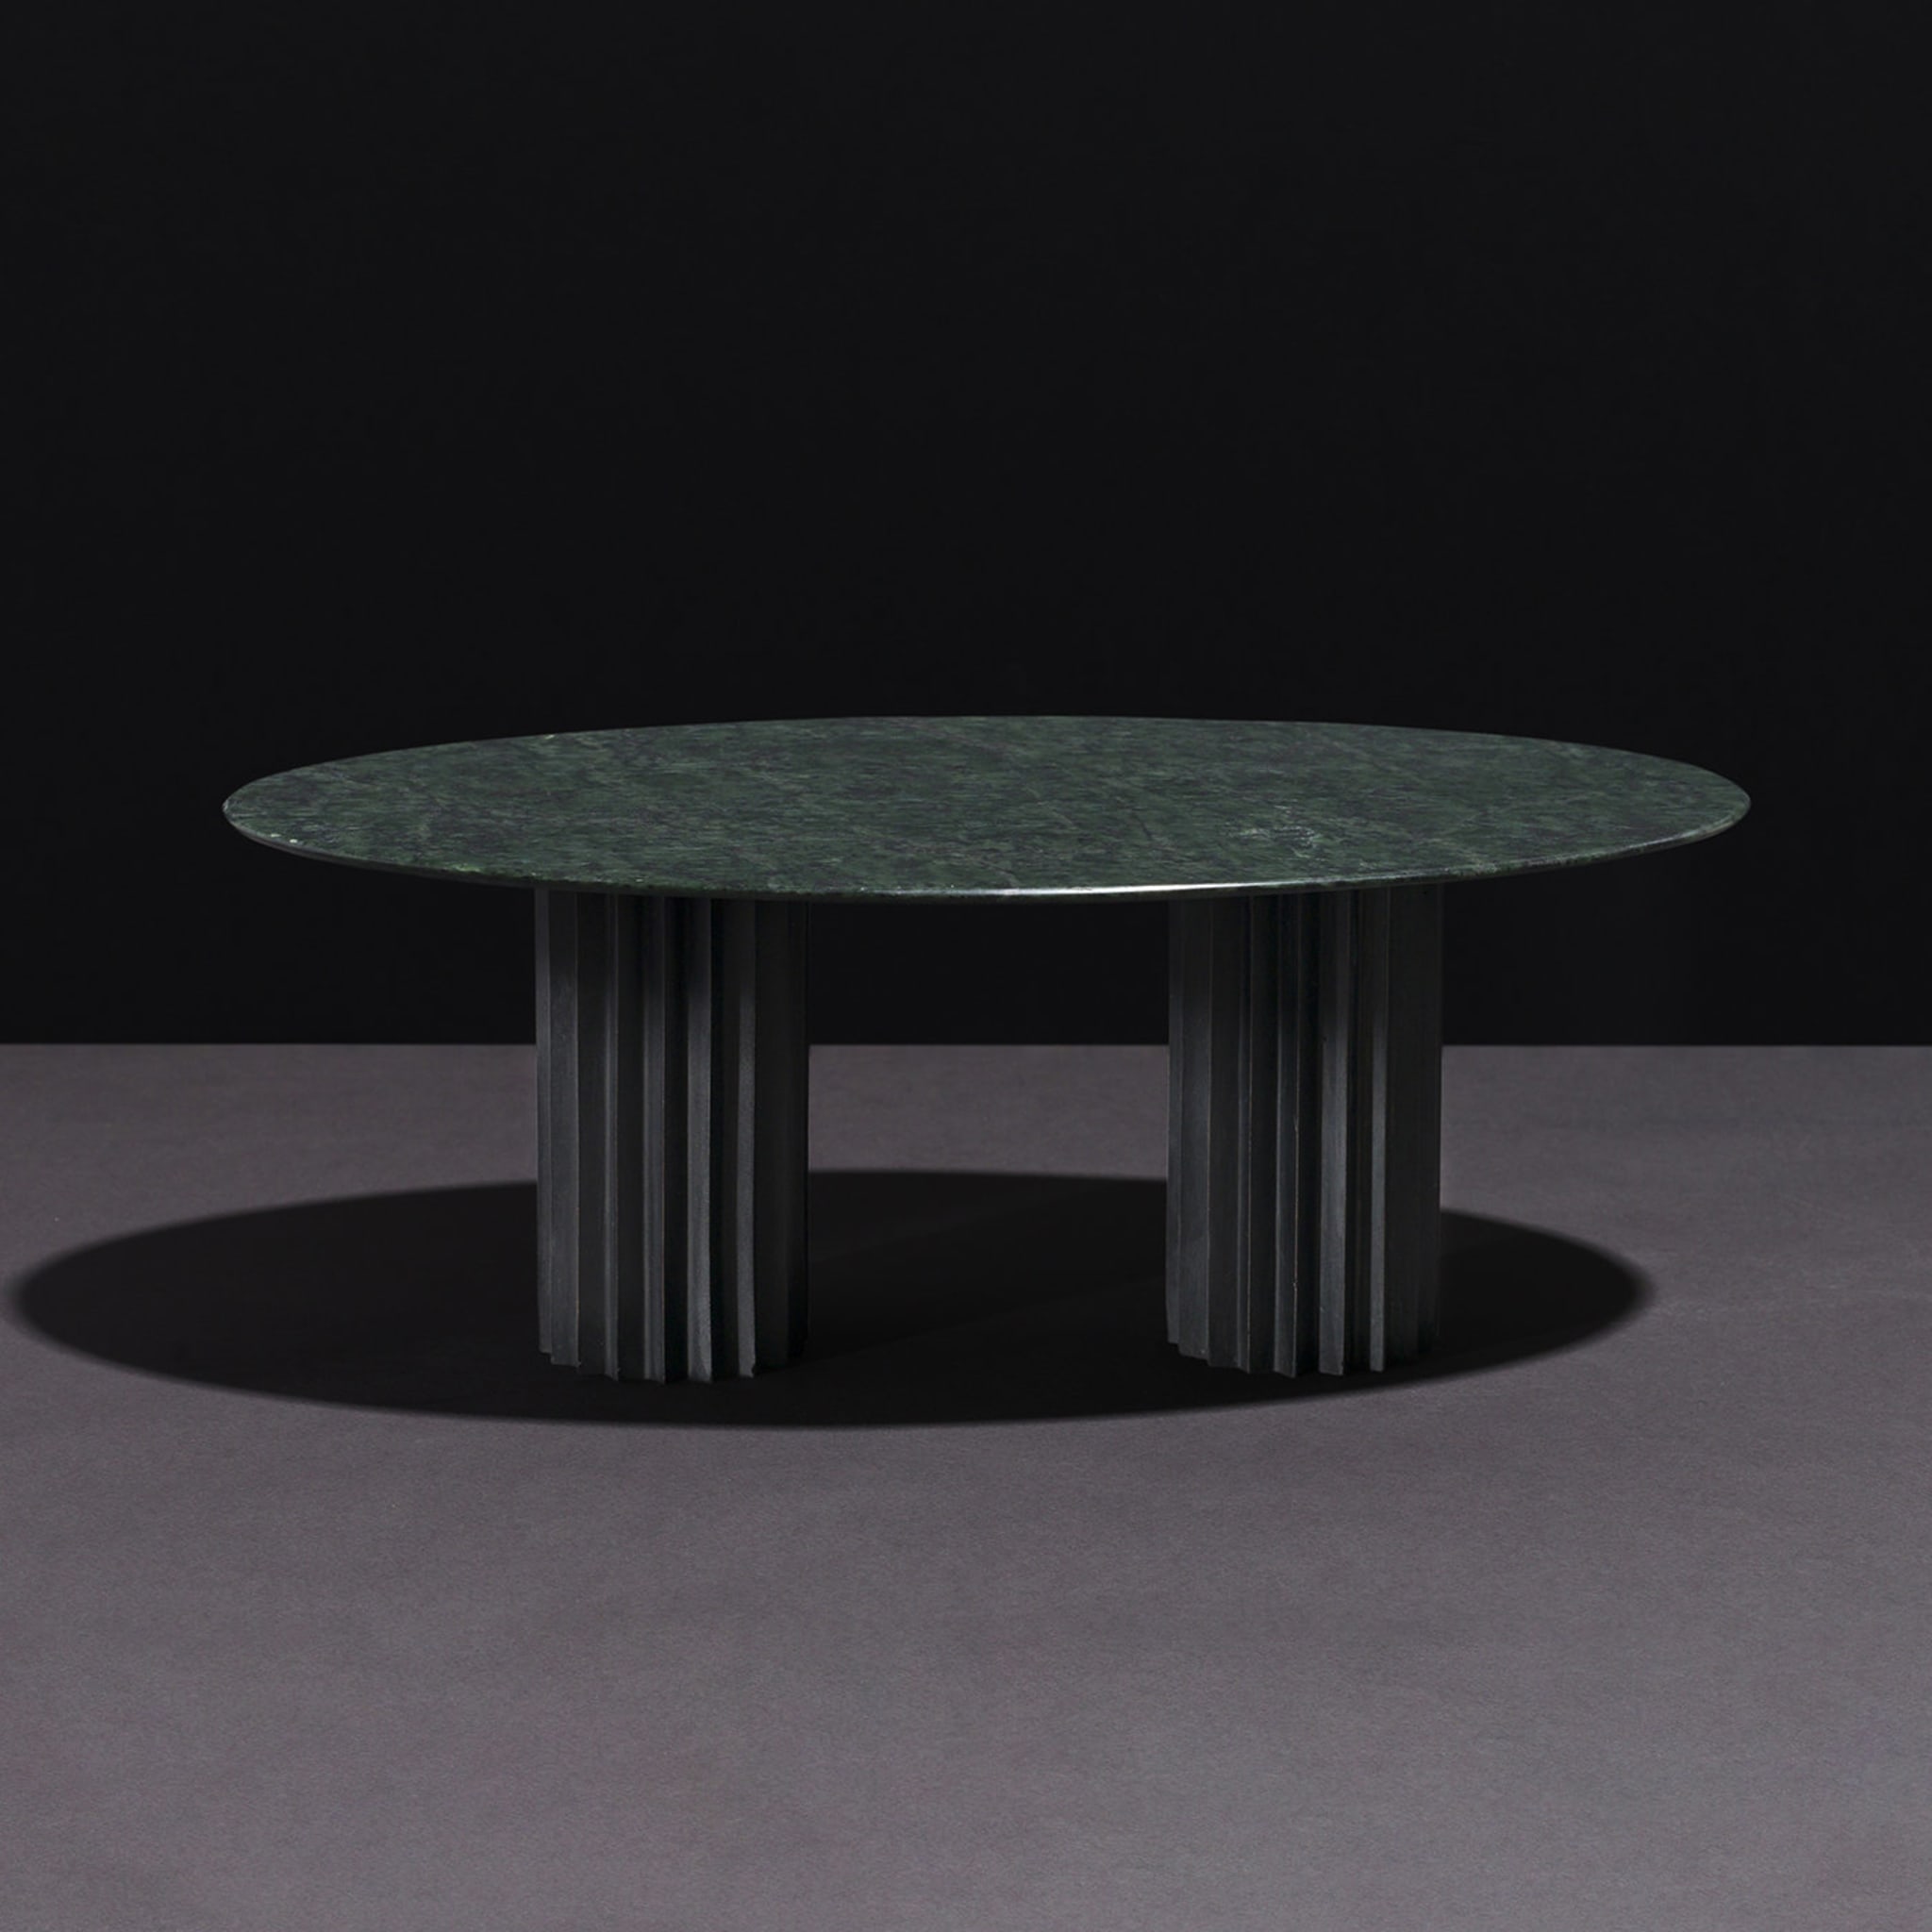 Doris Oval Dining Table in Green Marble and Bronze - Alternative view 2